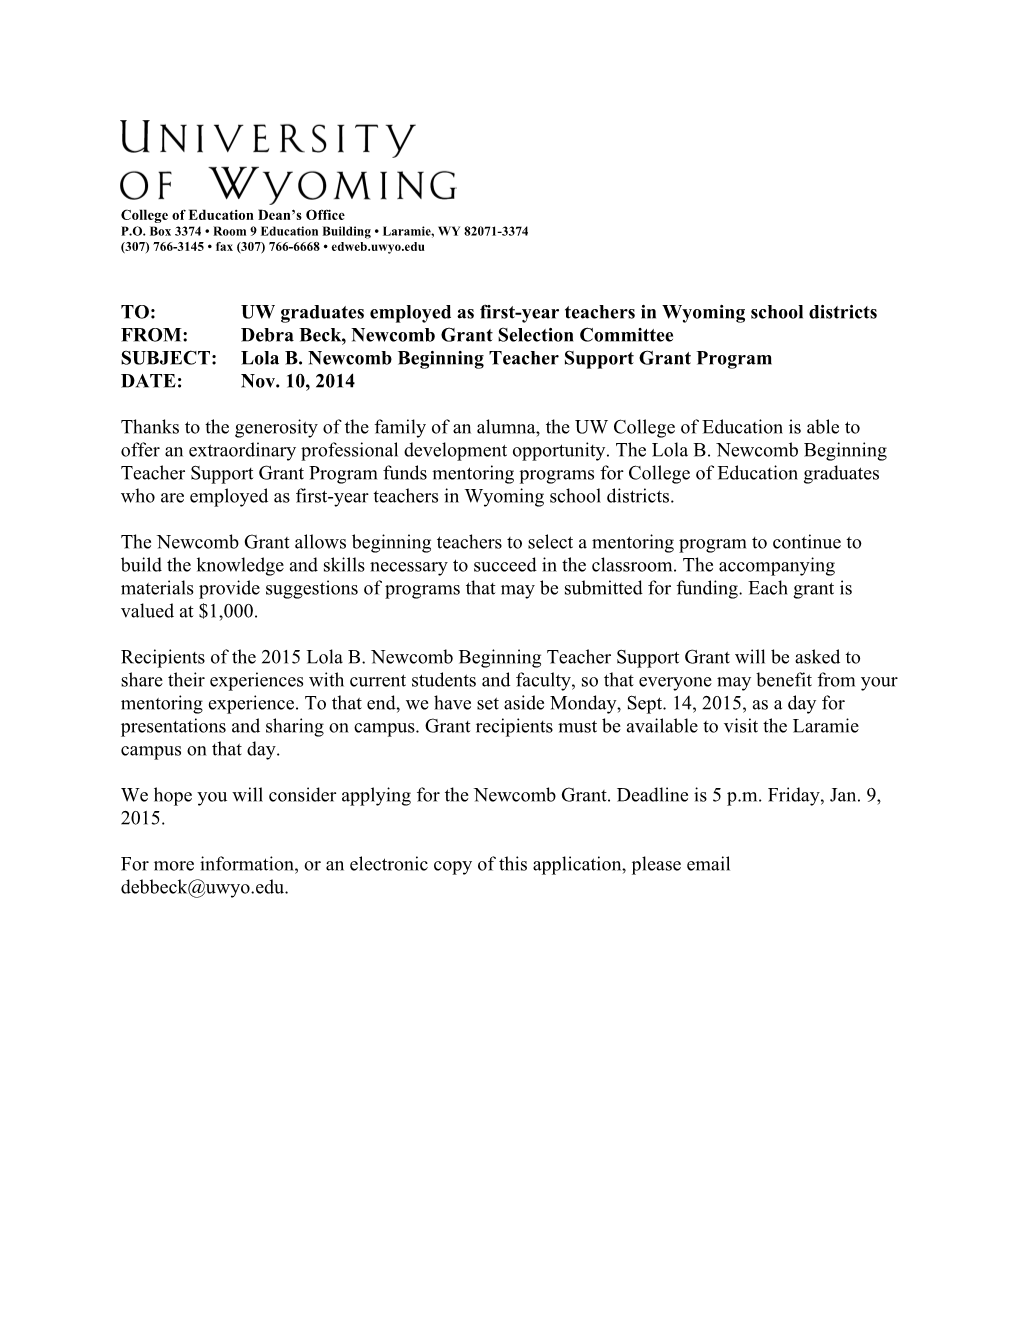 TO: UW Graduates Employed As First-Year Teachers in Wyoming School Districts